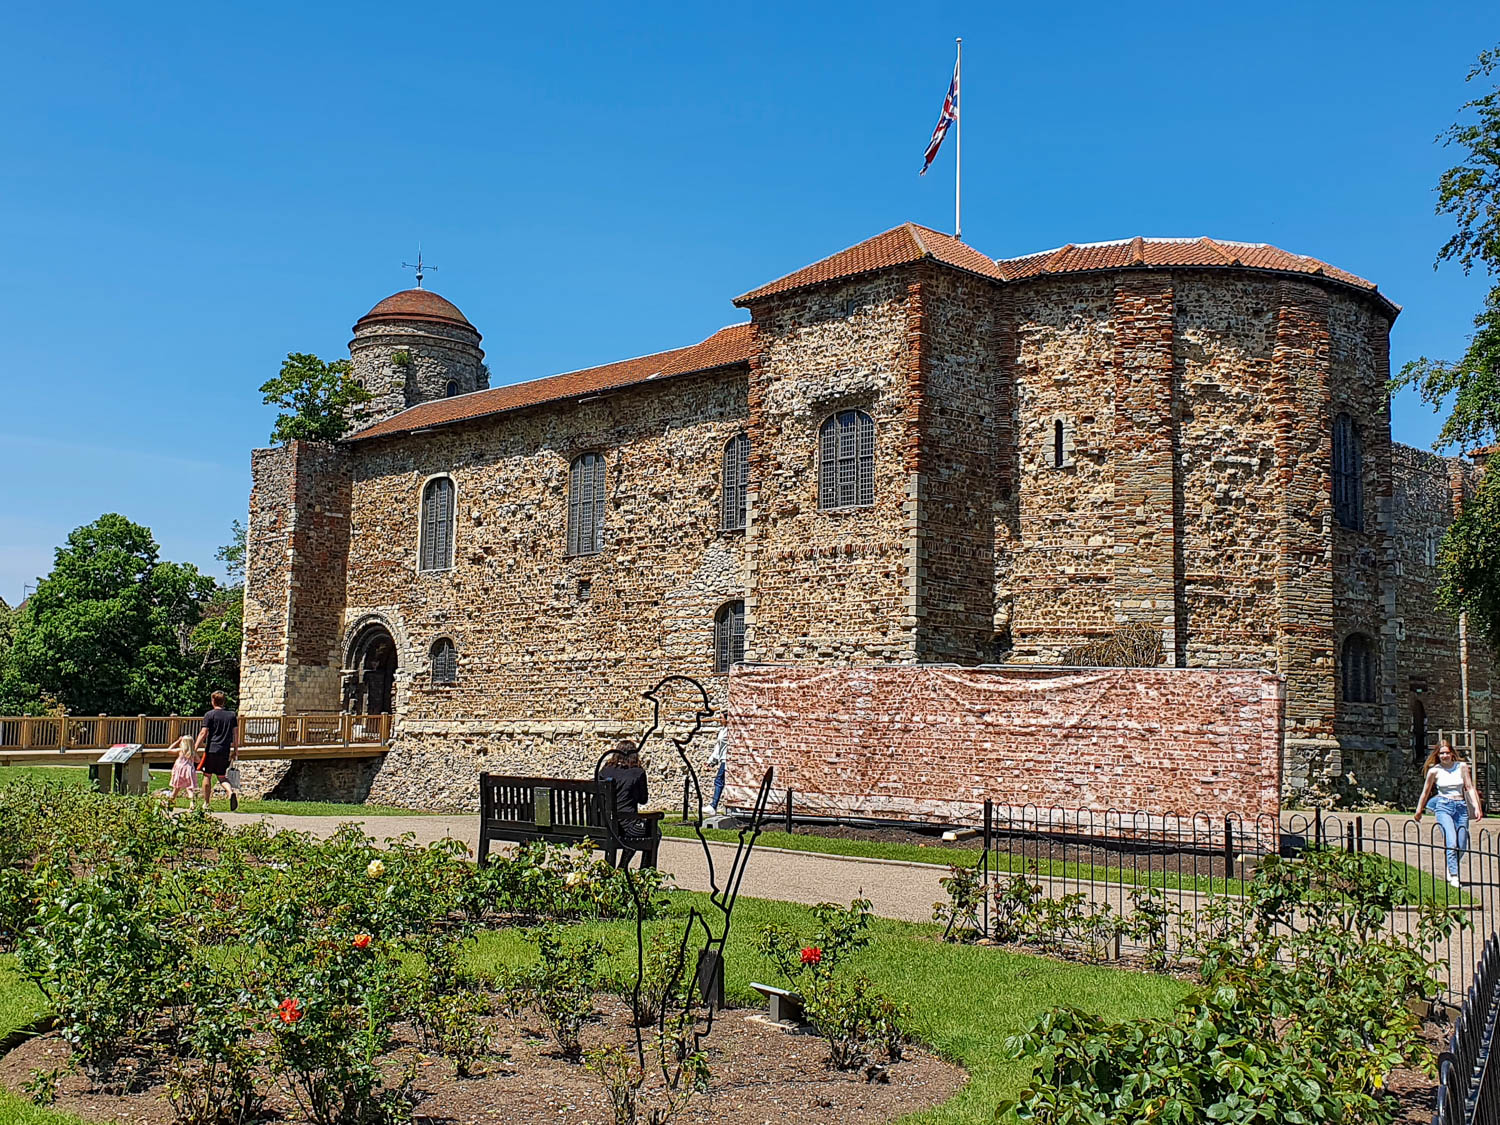 View of Colchester castle, home to the town's museum - one of my top things to do with kids in Colchester